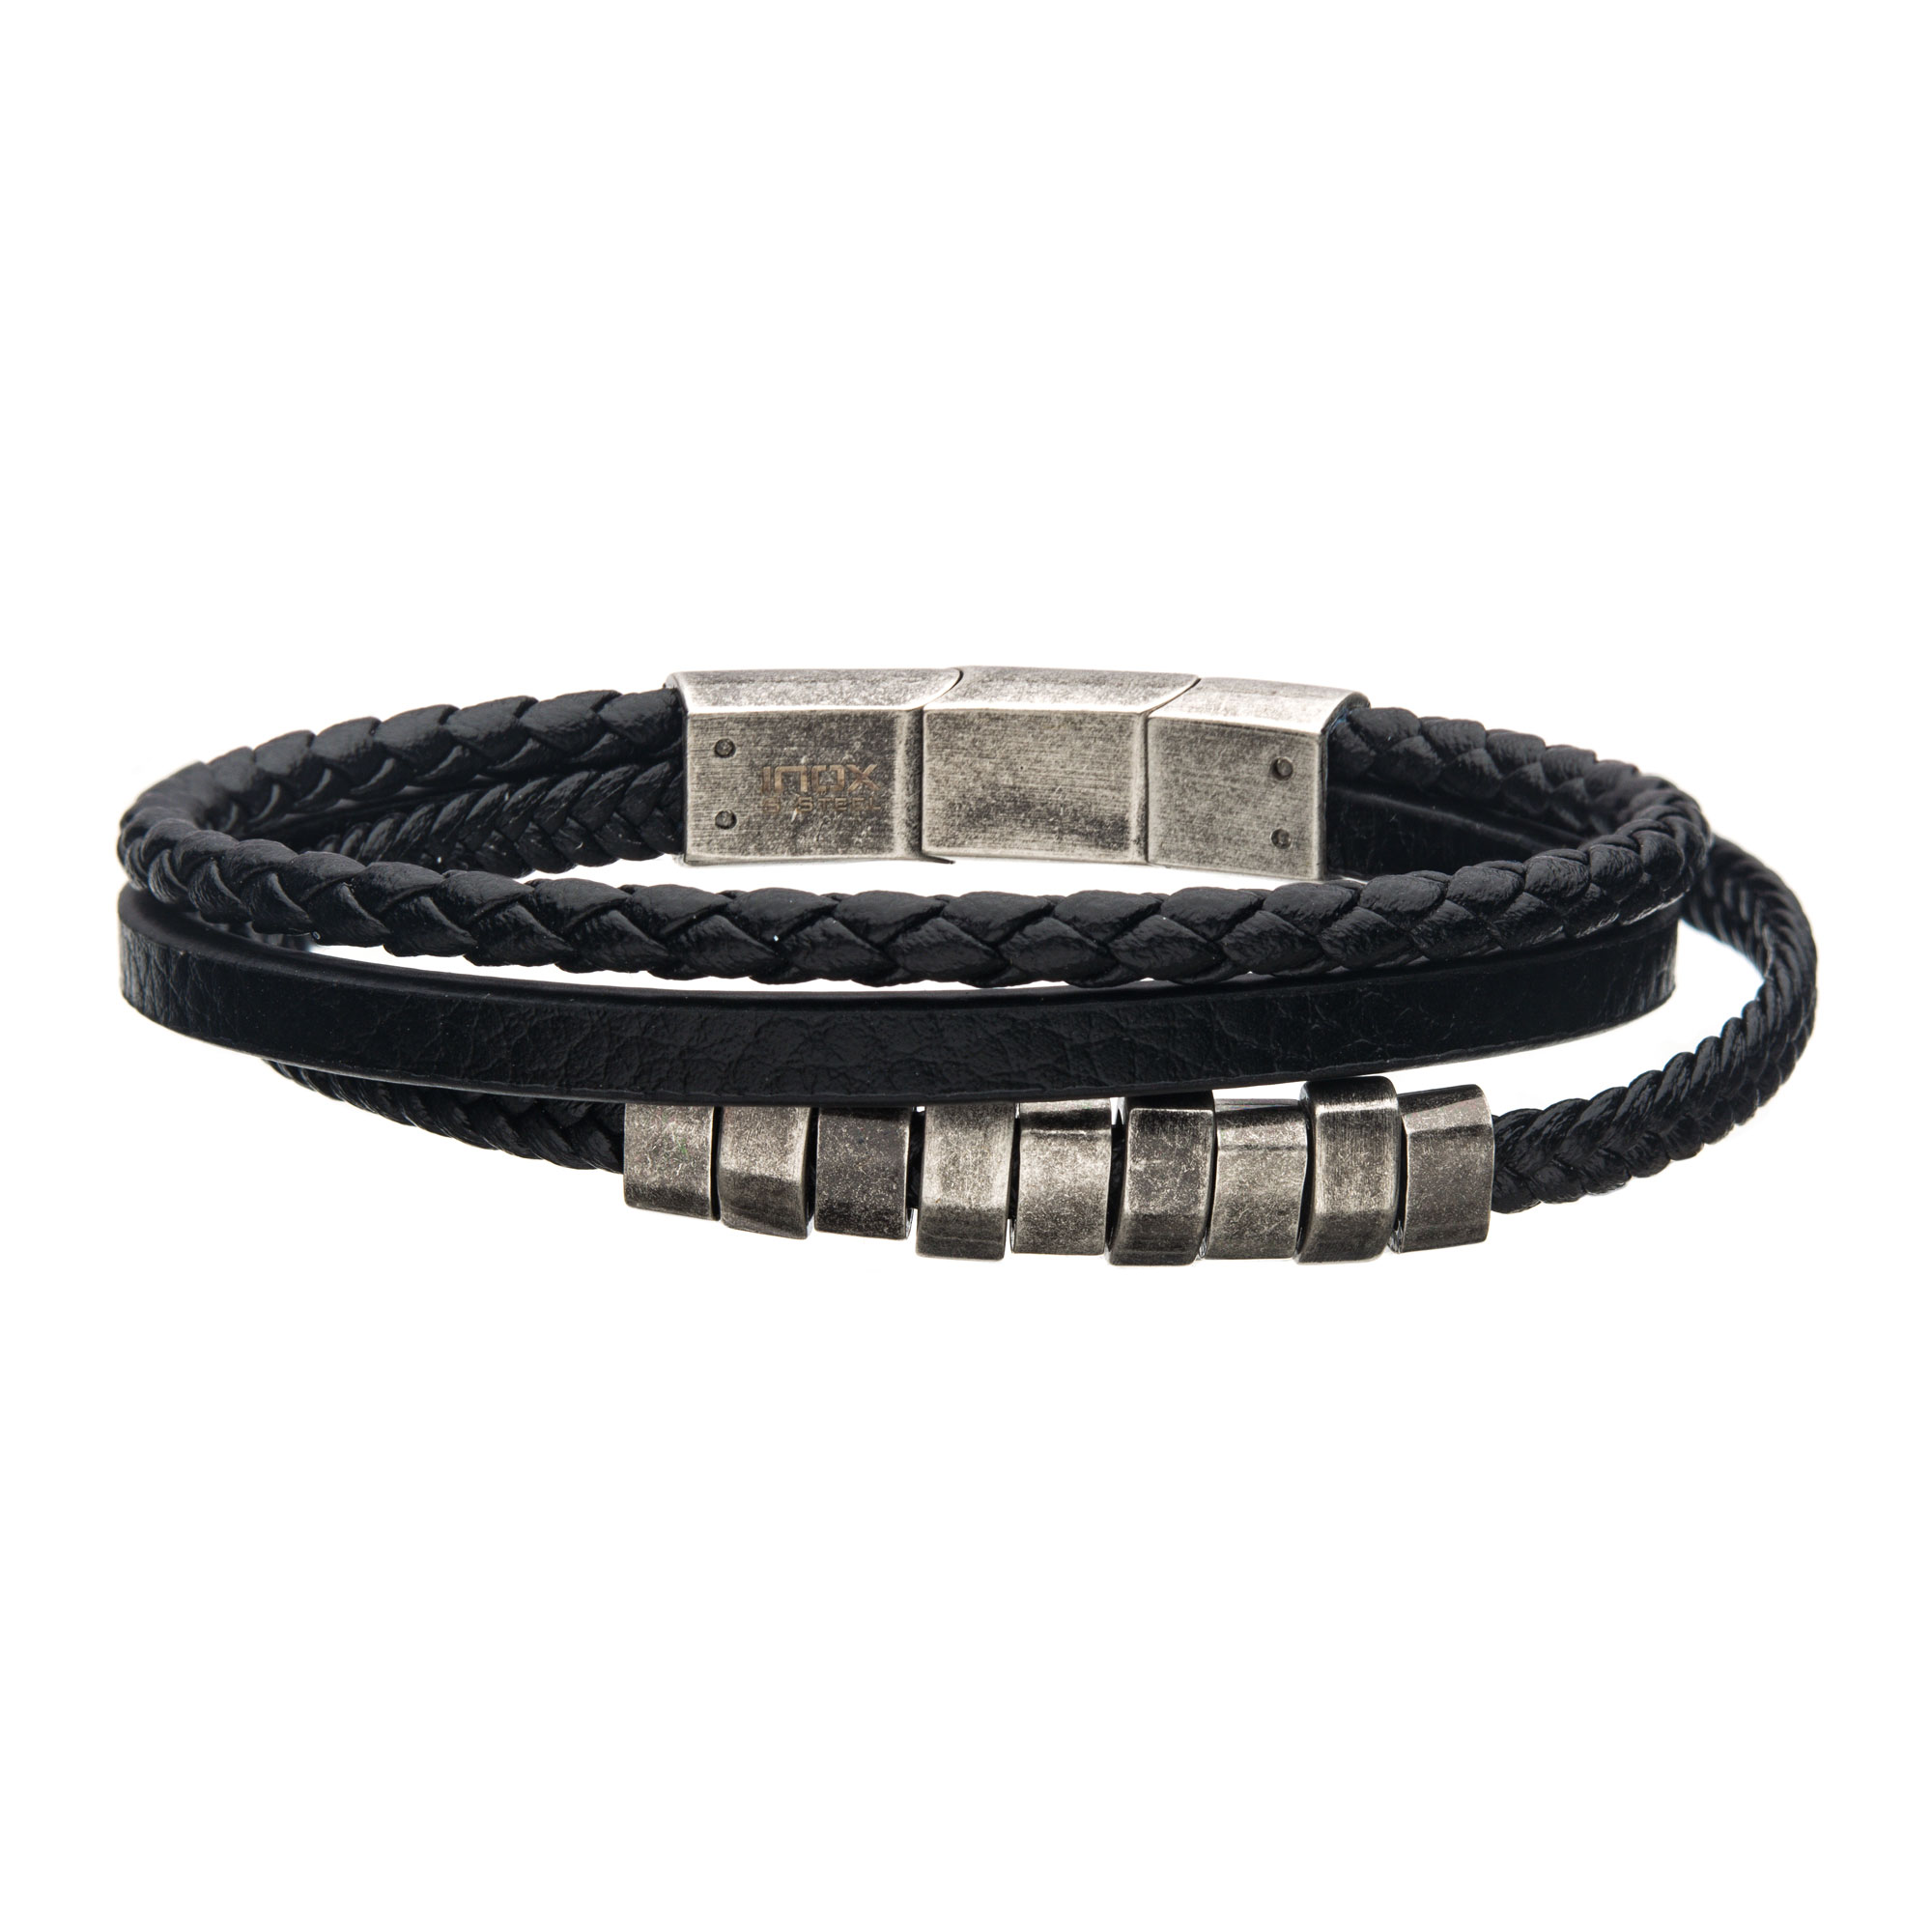 Black Braided Multi Leather with Antiqued Steel Beads Bracelet Jayson Jewelers Cape Girardeau, MO